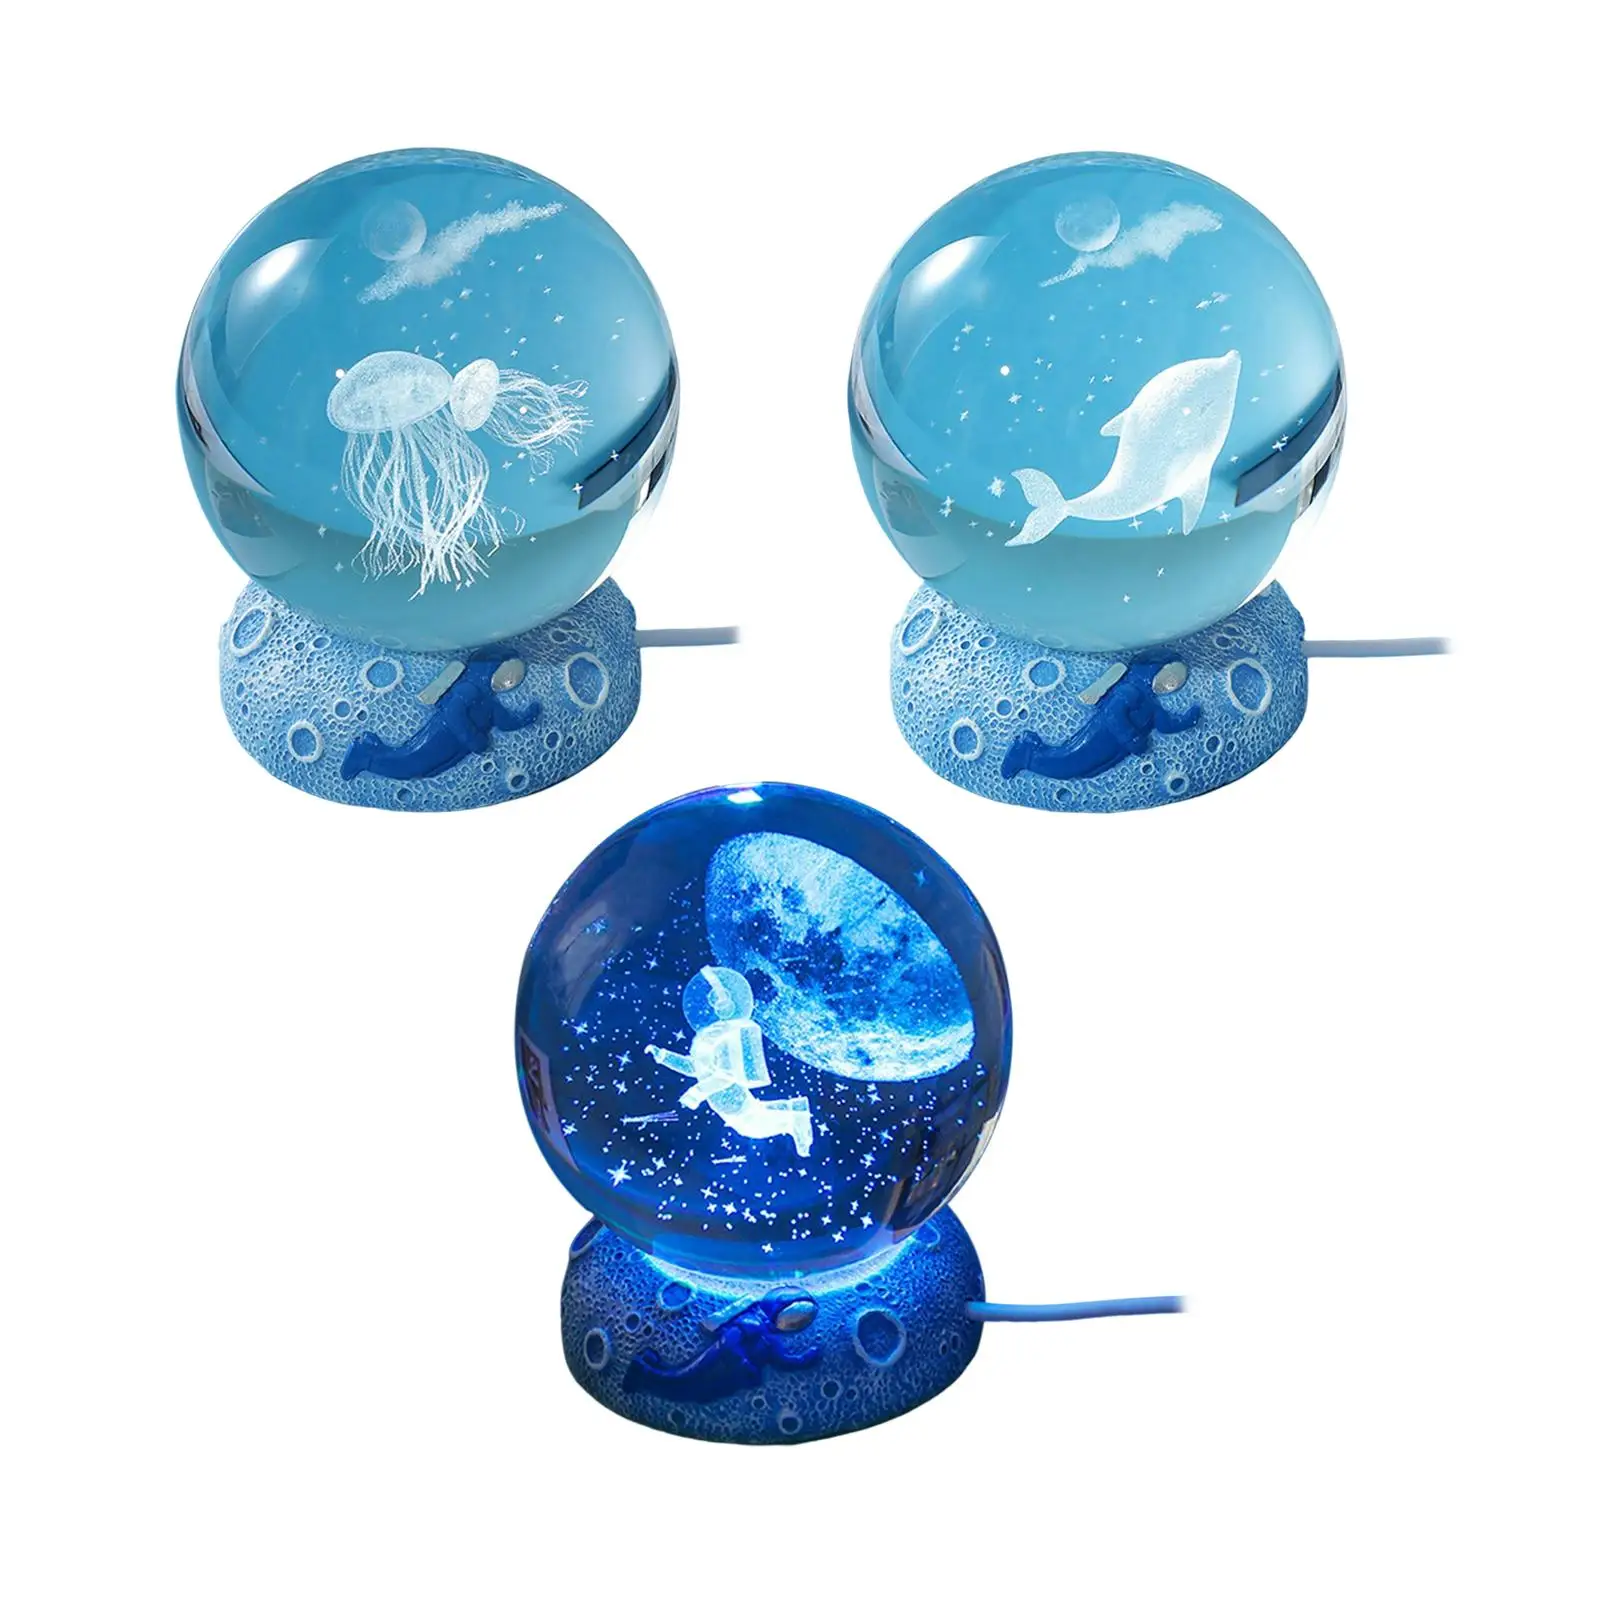 Creative Ball Night Light Bedside Lamp with Base Decorative Moon Light for Living Room Home Party Decoration Ornament